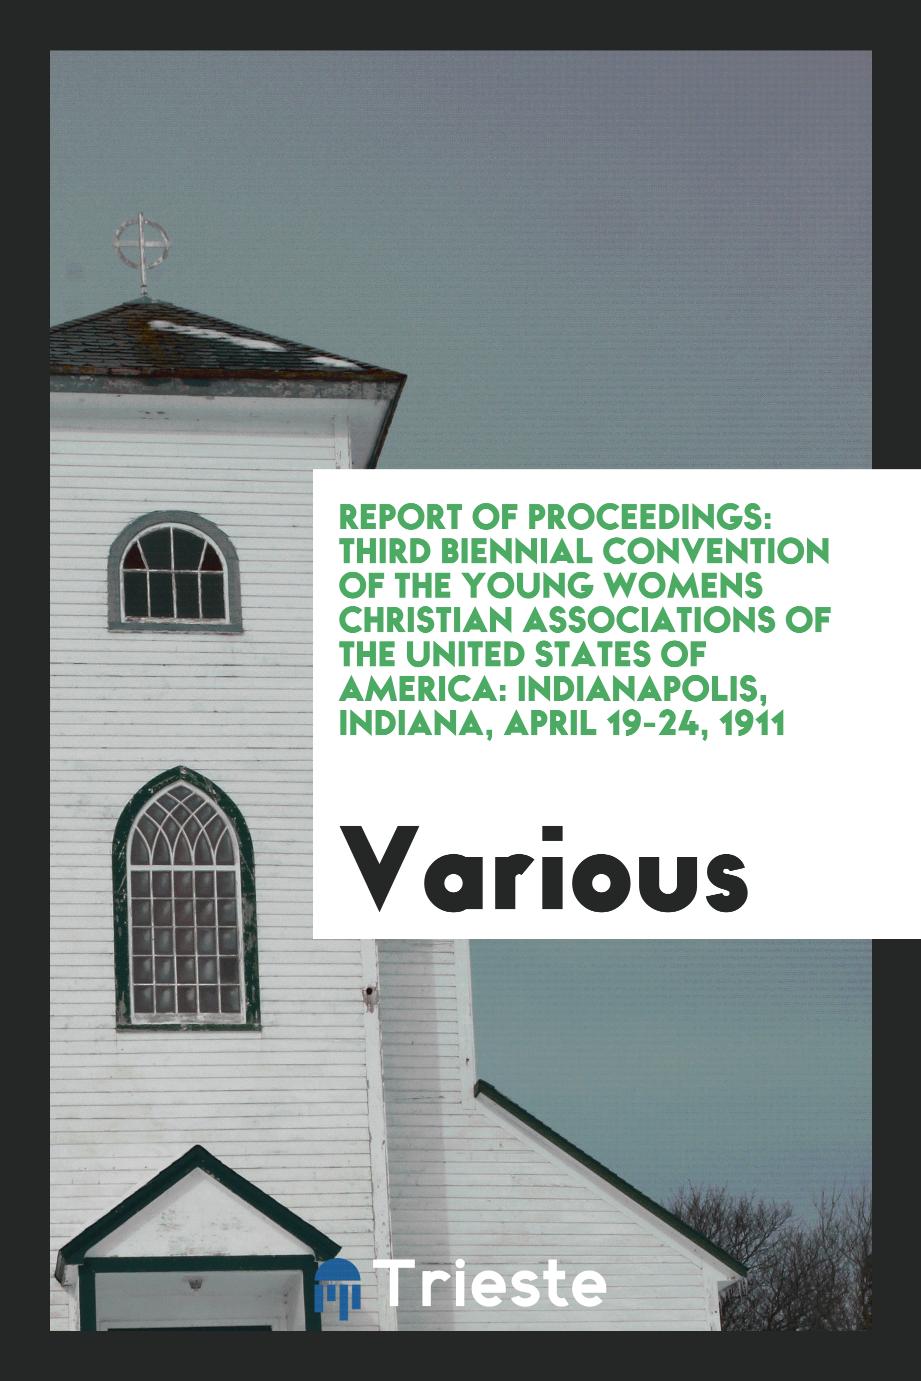 Report of proceedings: third biennial convention of the Young Womens Christian Associations of the United States of America: Indianapolis, Indiana, April 19-24, 1911